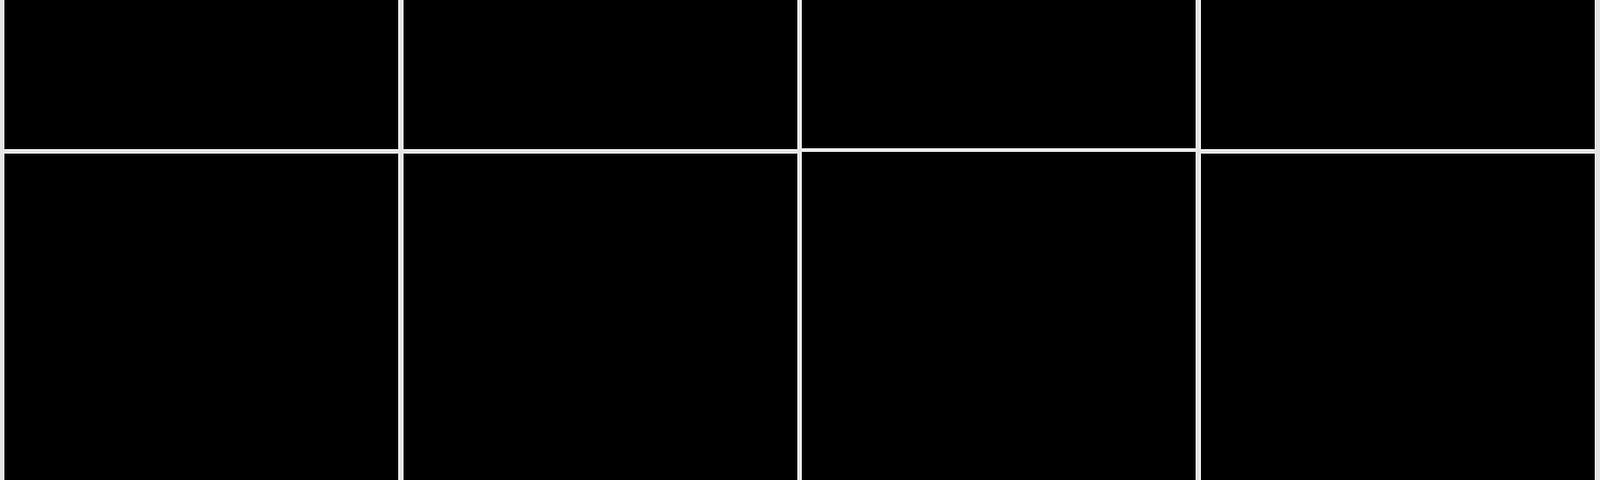 Grid of black squares resembling an Instagram feed.